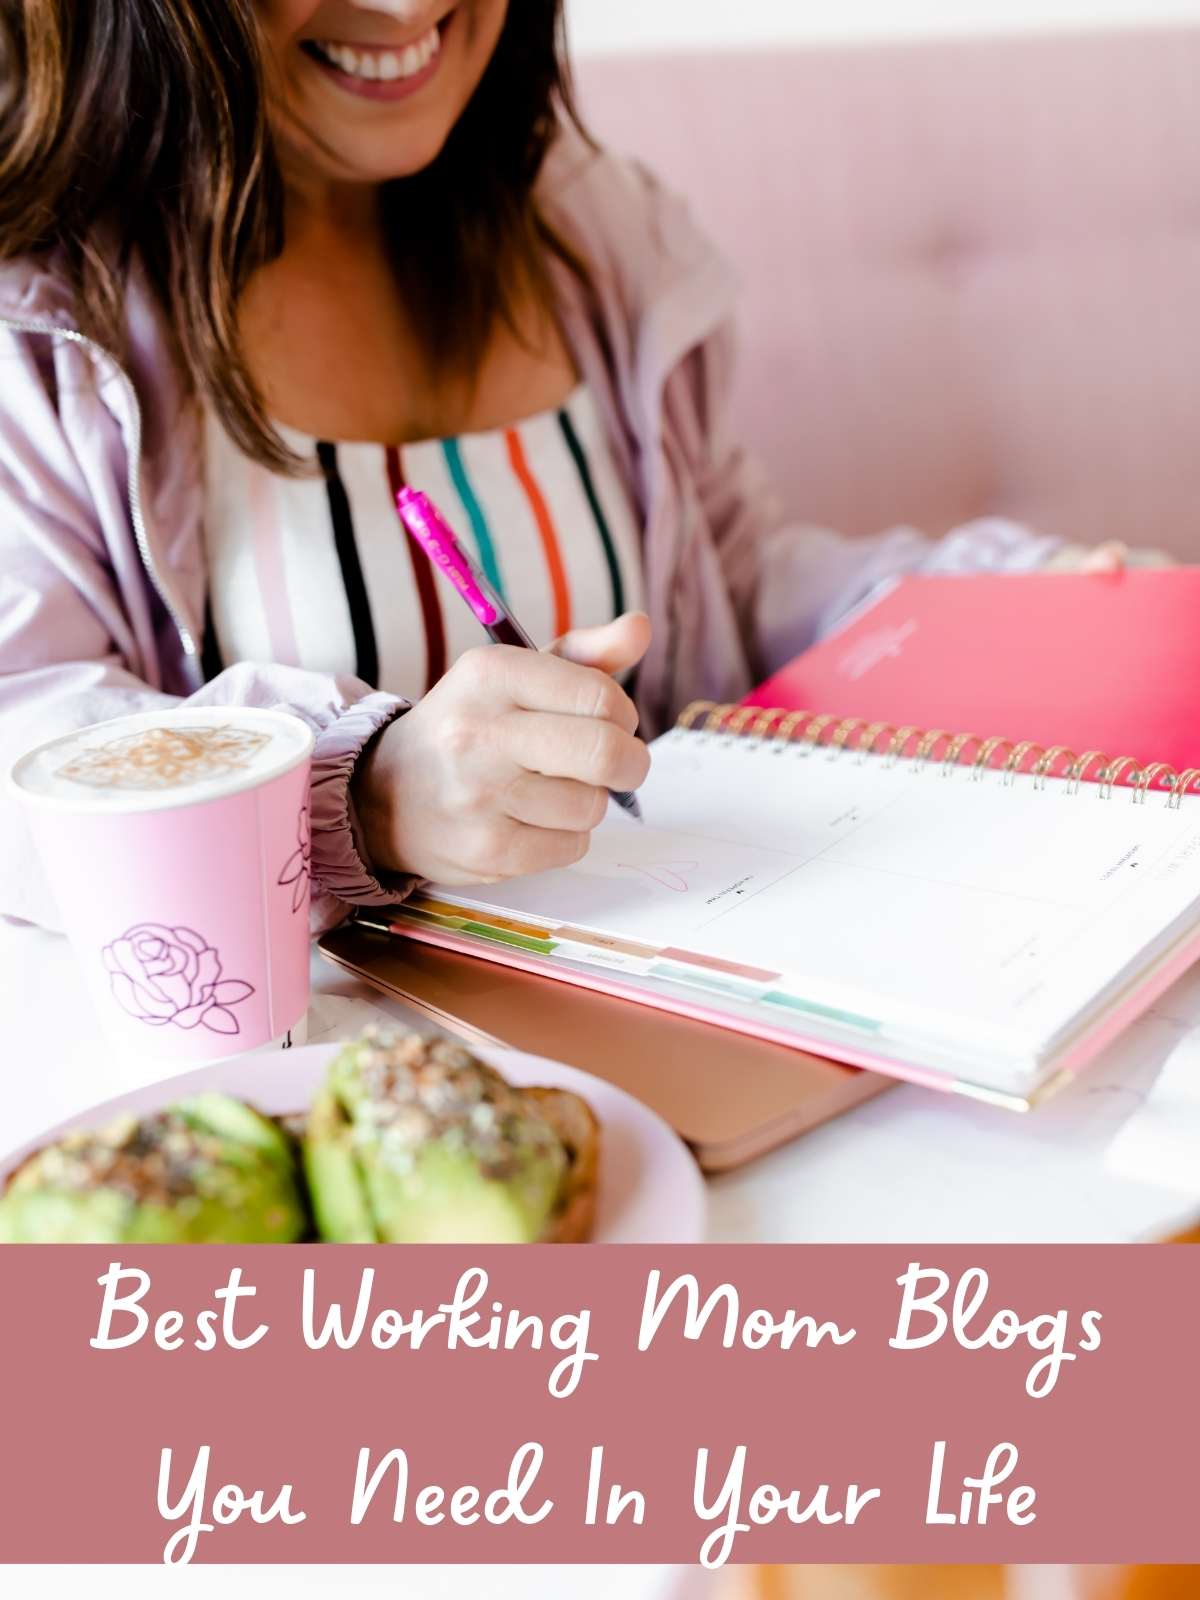 Best working mom blogs you need in your life. Photo of woman writing things in planner.